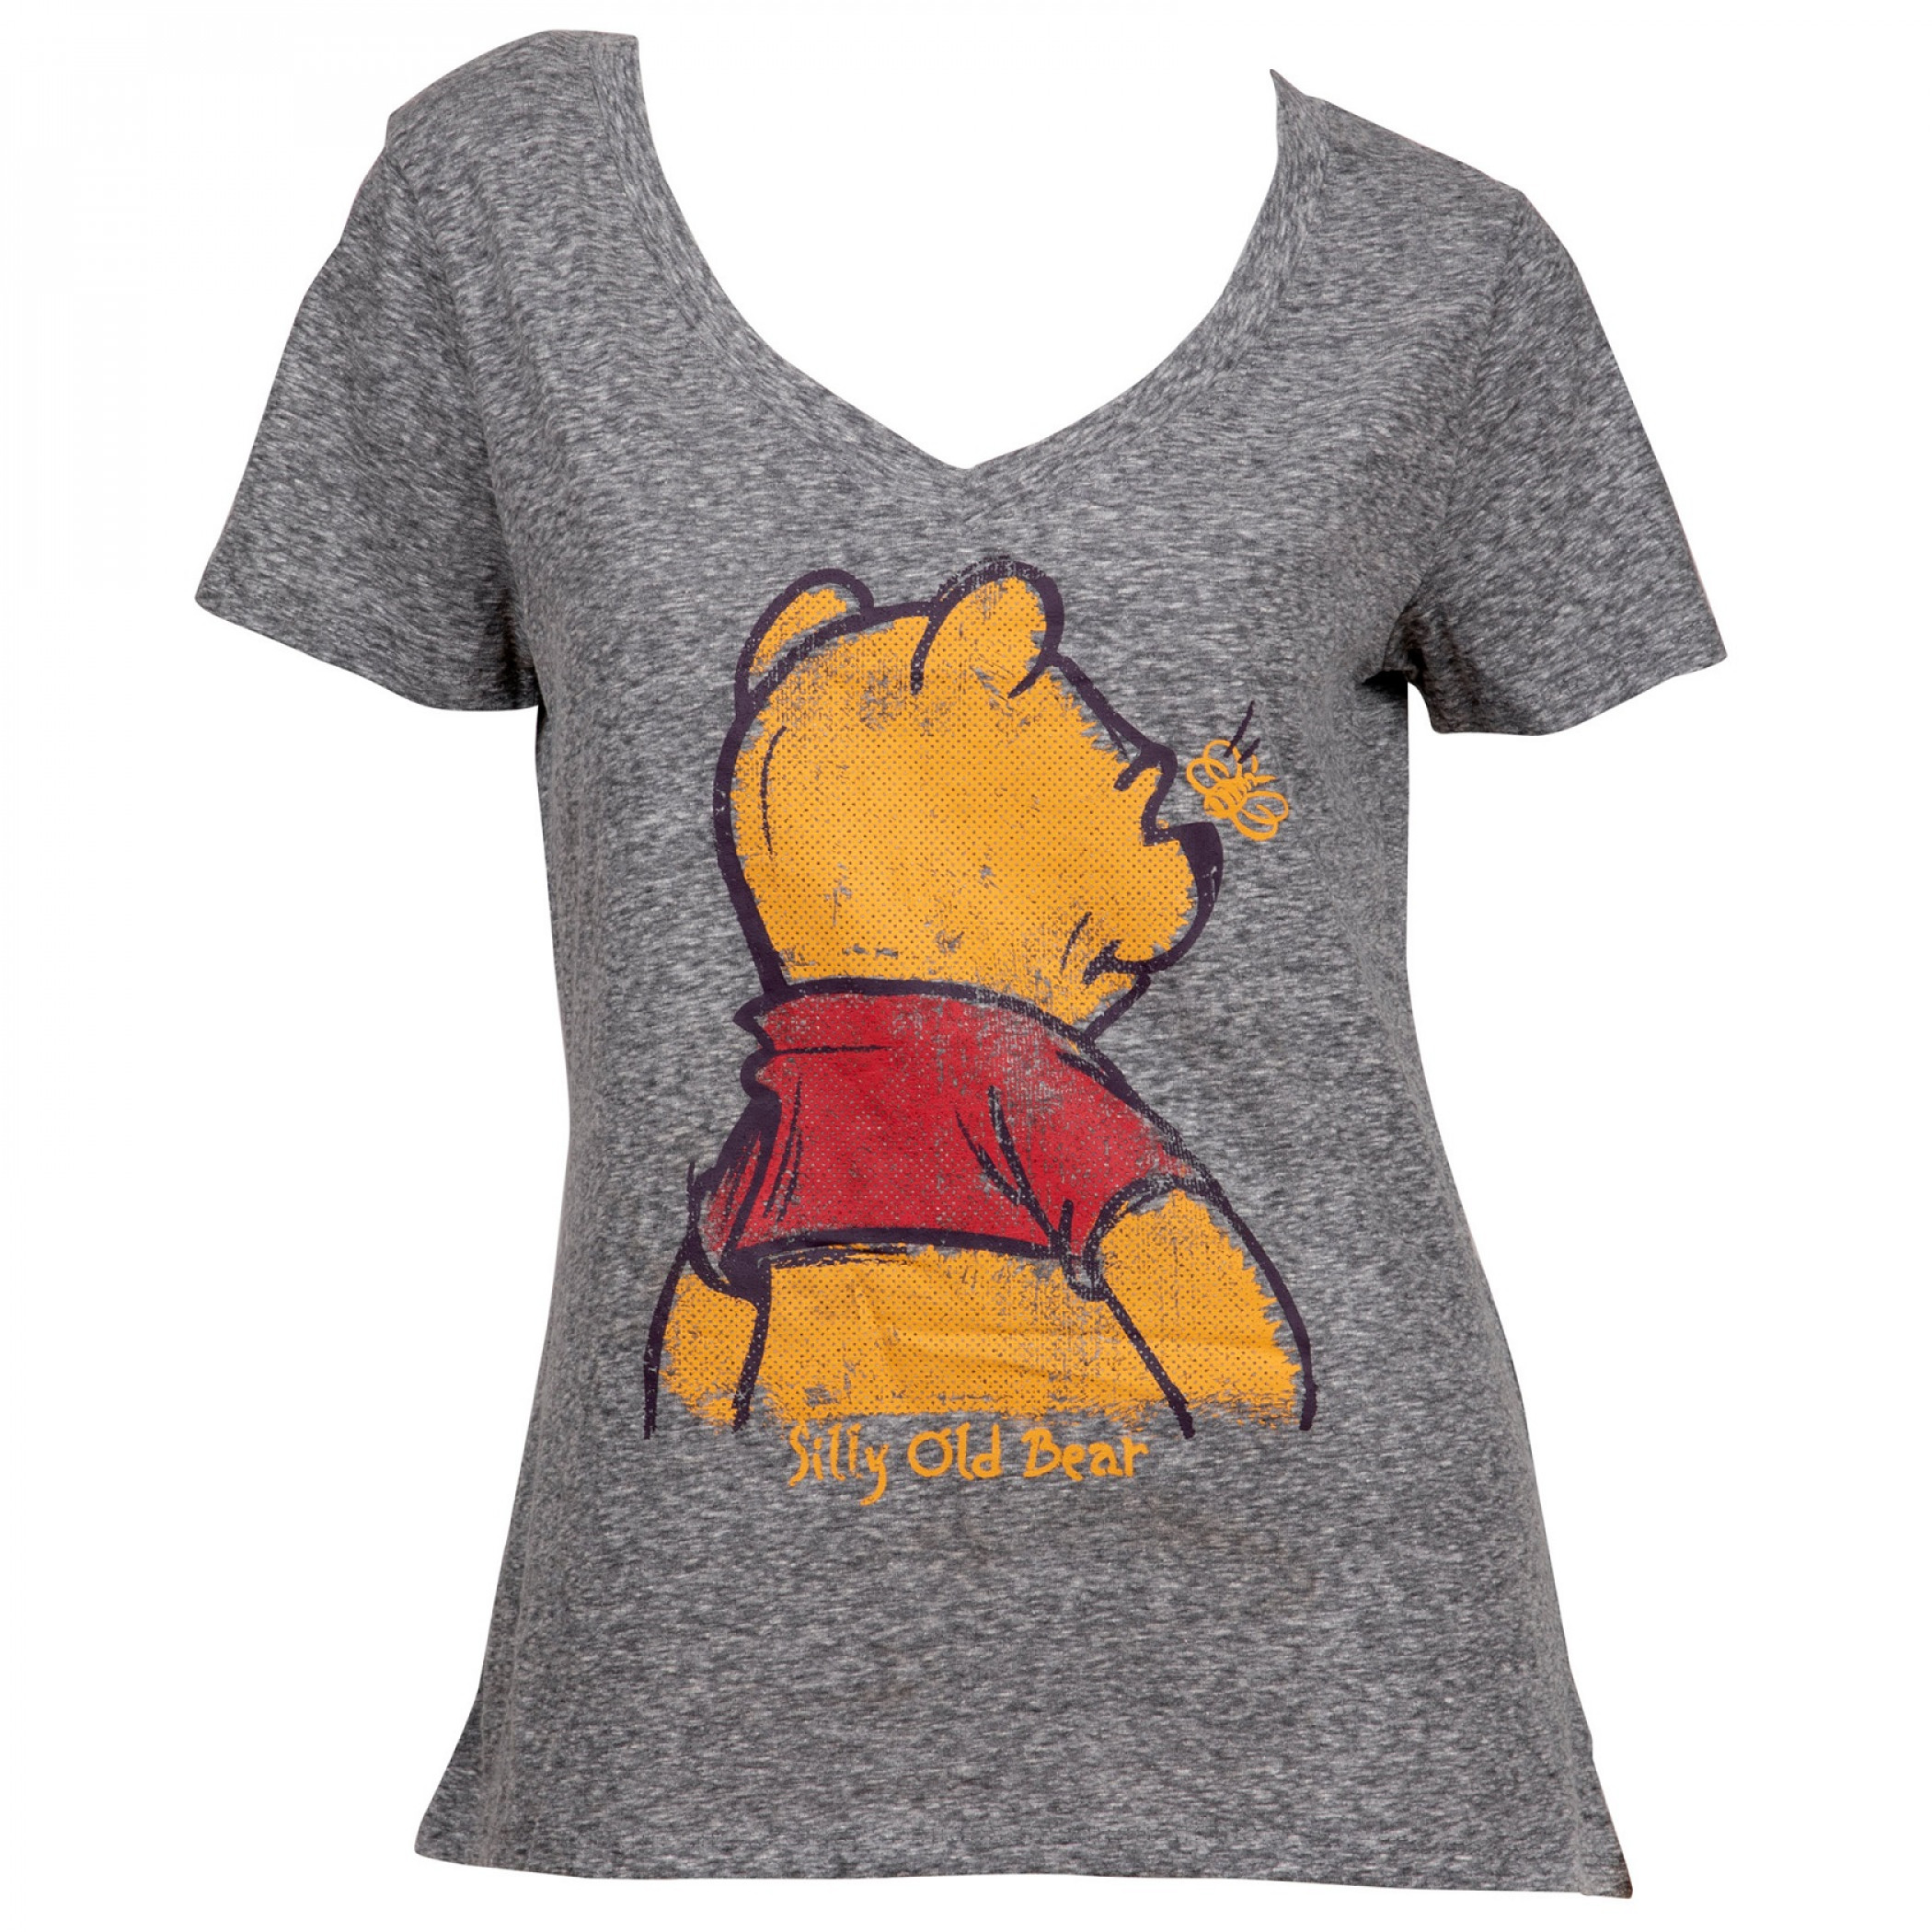 Winnie the Pooh Silly Old Bear Women's T-Shirt